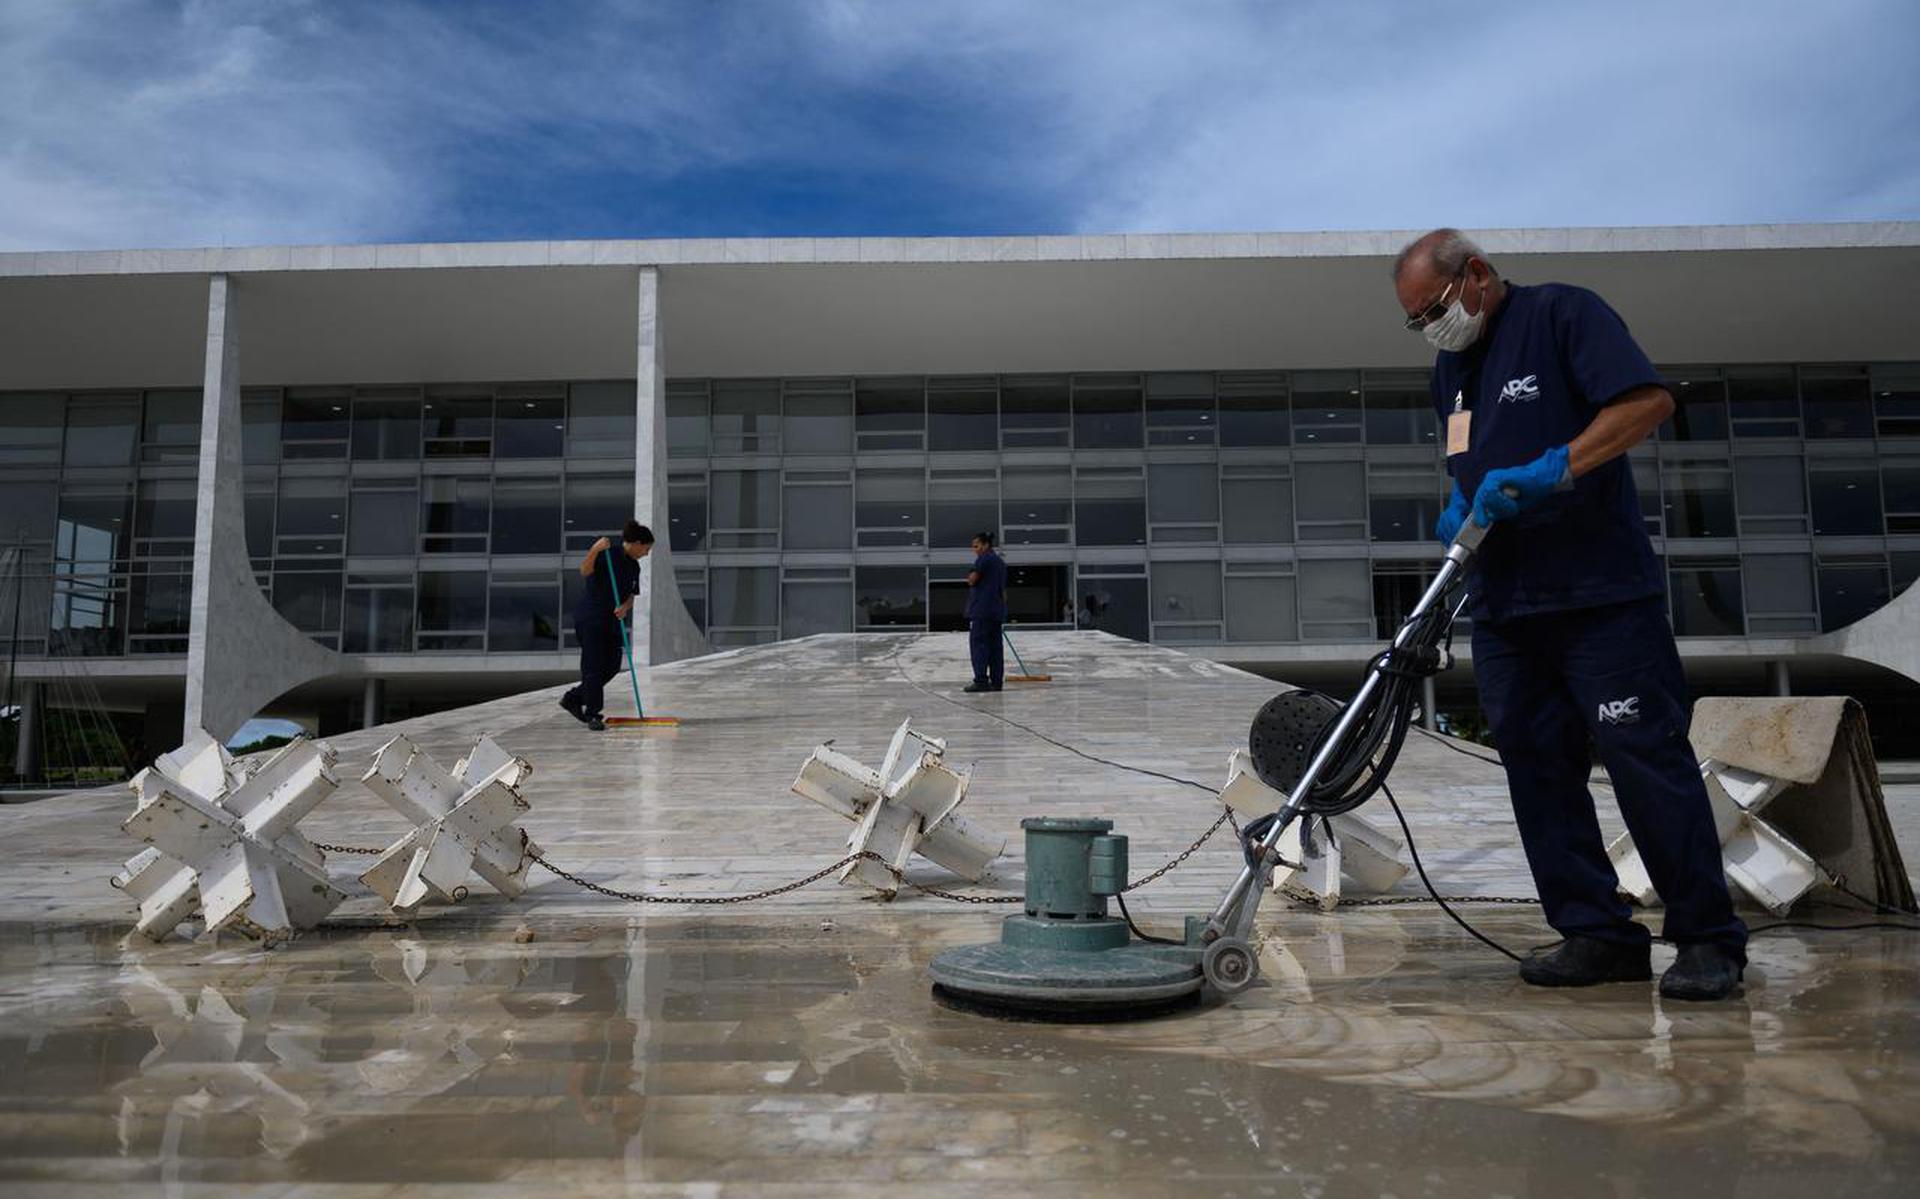 Workers polish and mop the floor during clean-up procedures at Planalto Palace in Brasilia on January 9, 2023, a day after supporters of Brazil's far-right ex-president Jair Bolsonaro invaded the Congress, presidential palace, and Supreme Court. - Brazilian security forces locked down the area around Congress, the presidential palace and the Supreme Court Monday, a day after supporters of ex-president Jair Bolsonaro stormed the seat of power in riots that triggered an international outcry. Hardline Bolsonaro supporters have been protesting outside army bases calling for a military intervention to stop Lula from taking power since his election win. (Photo by MAURO PIMENTEL / AFP)